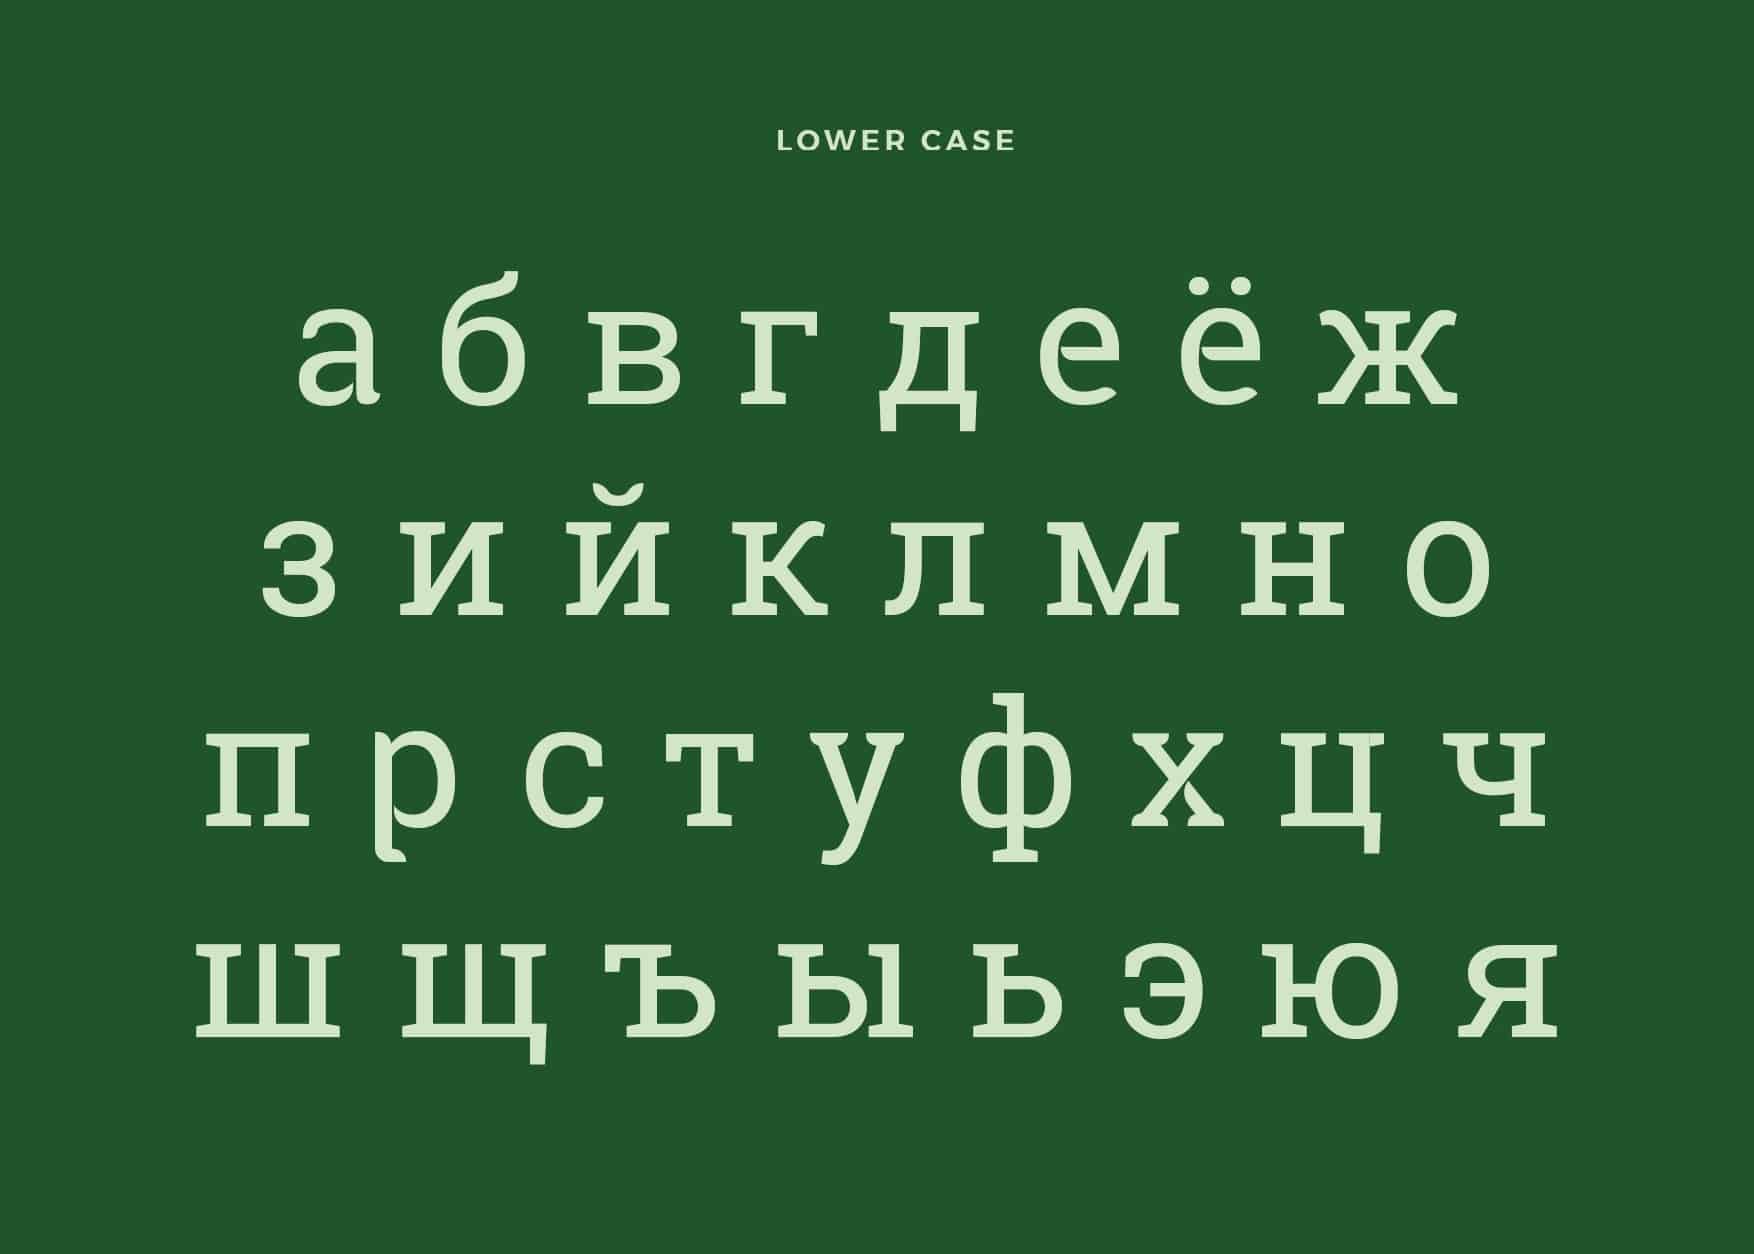 Download Robika  font (typeface)